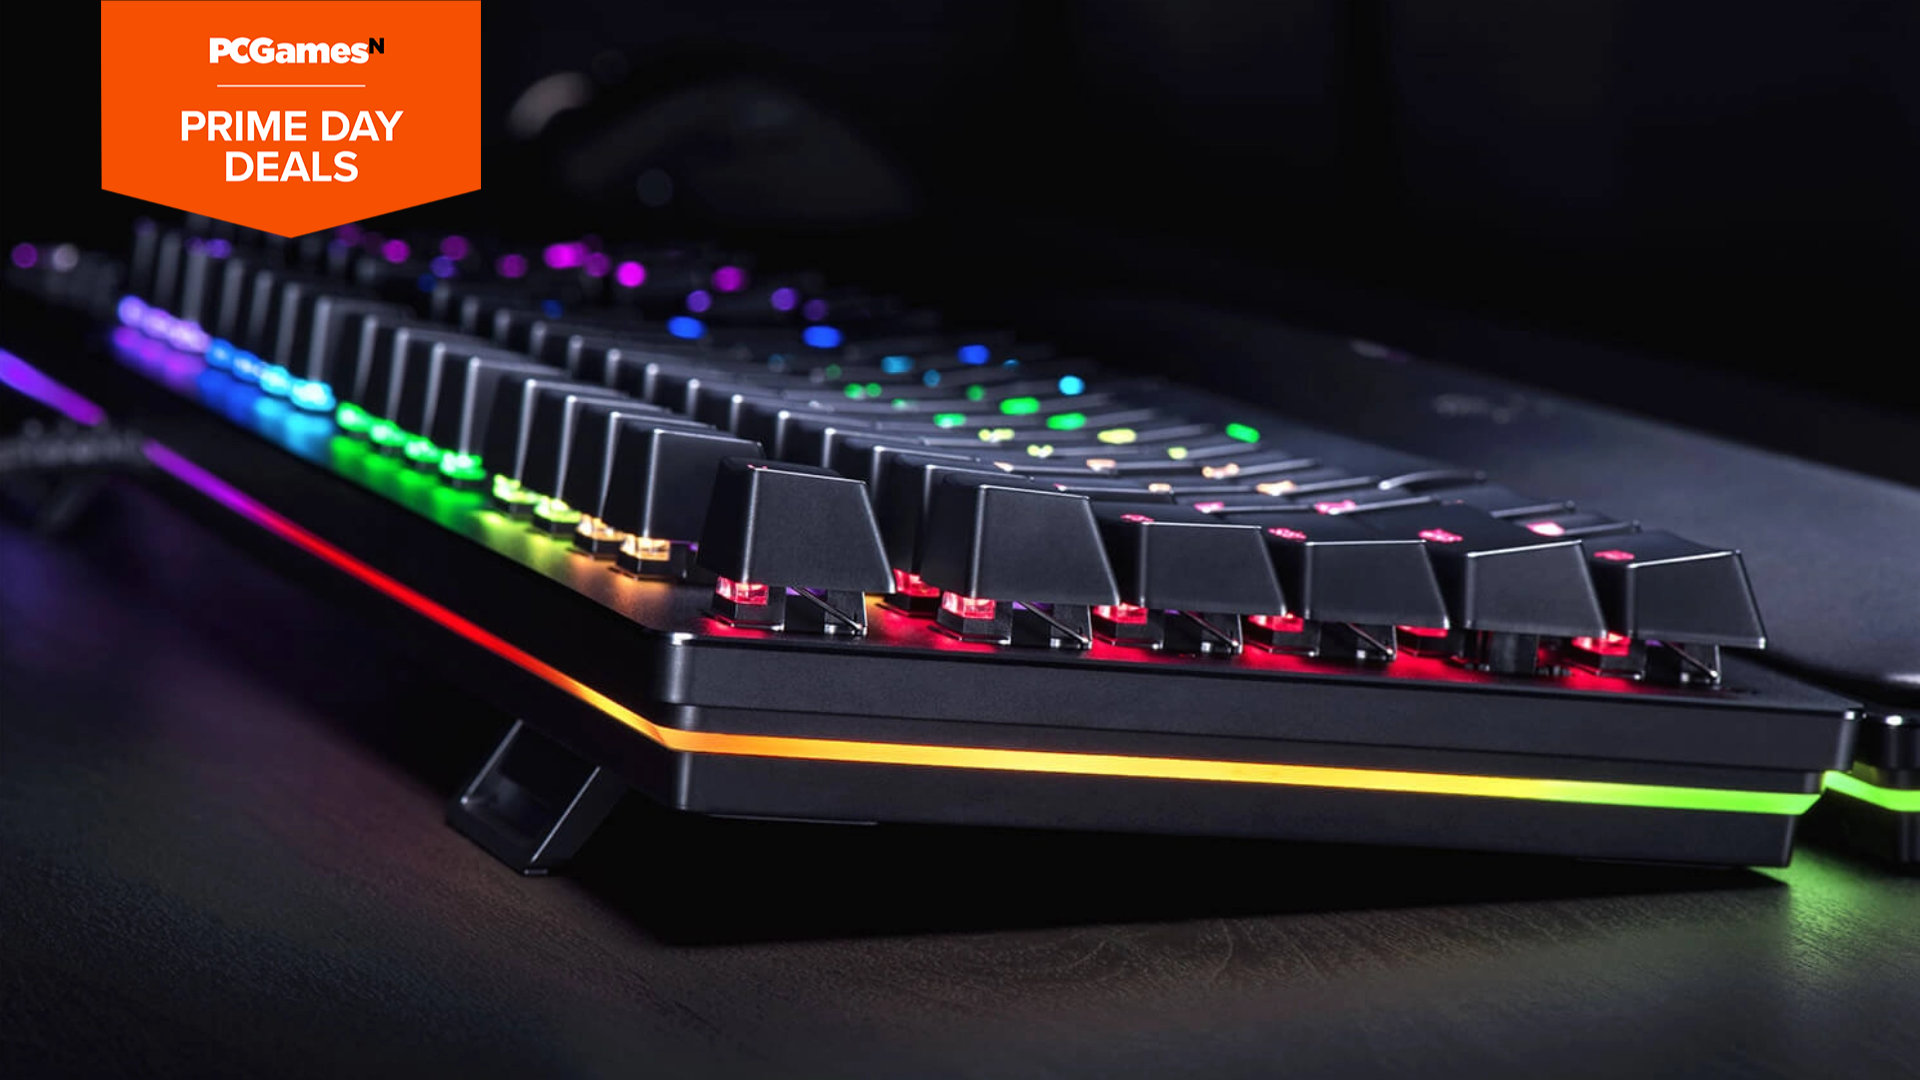 The best Amazon Prime Day gaming keyboard deals